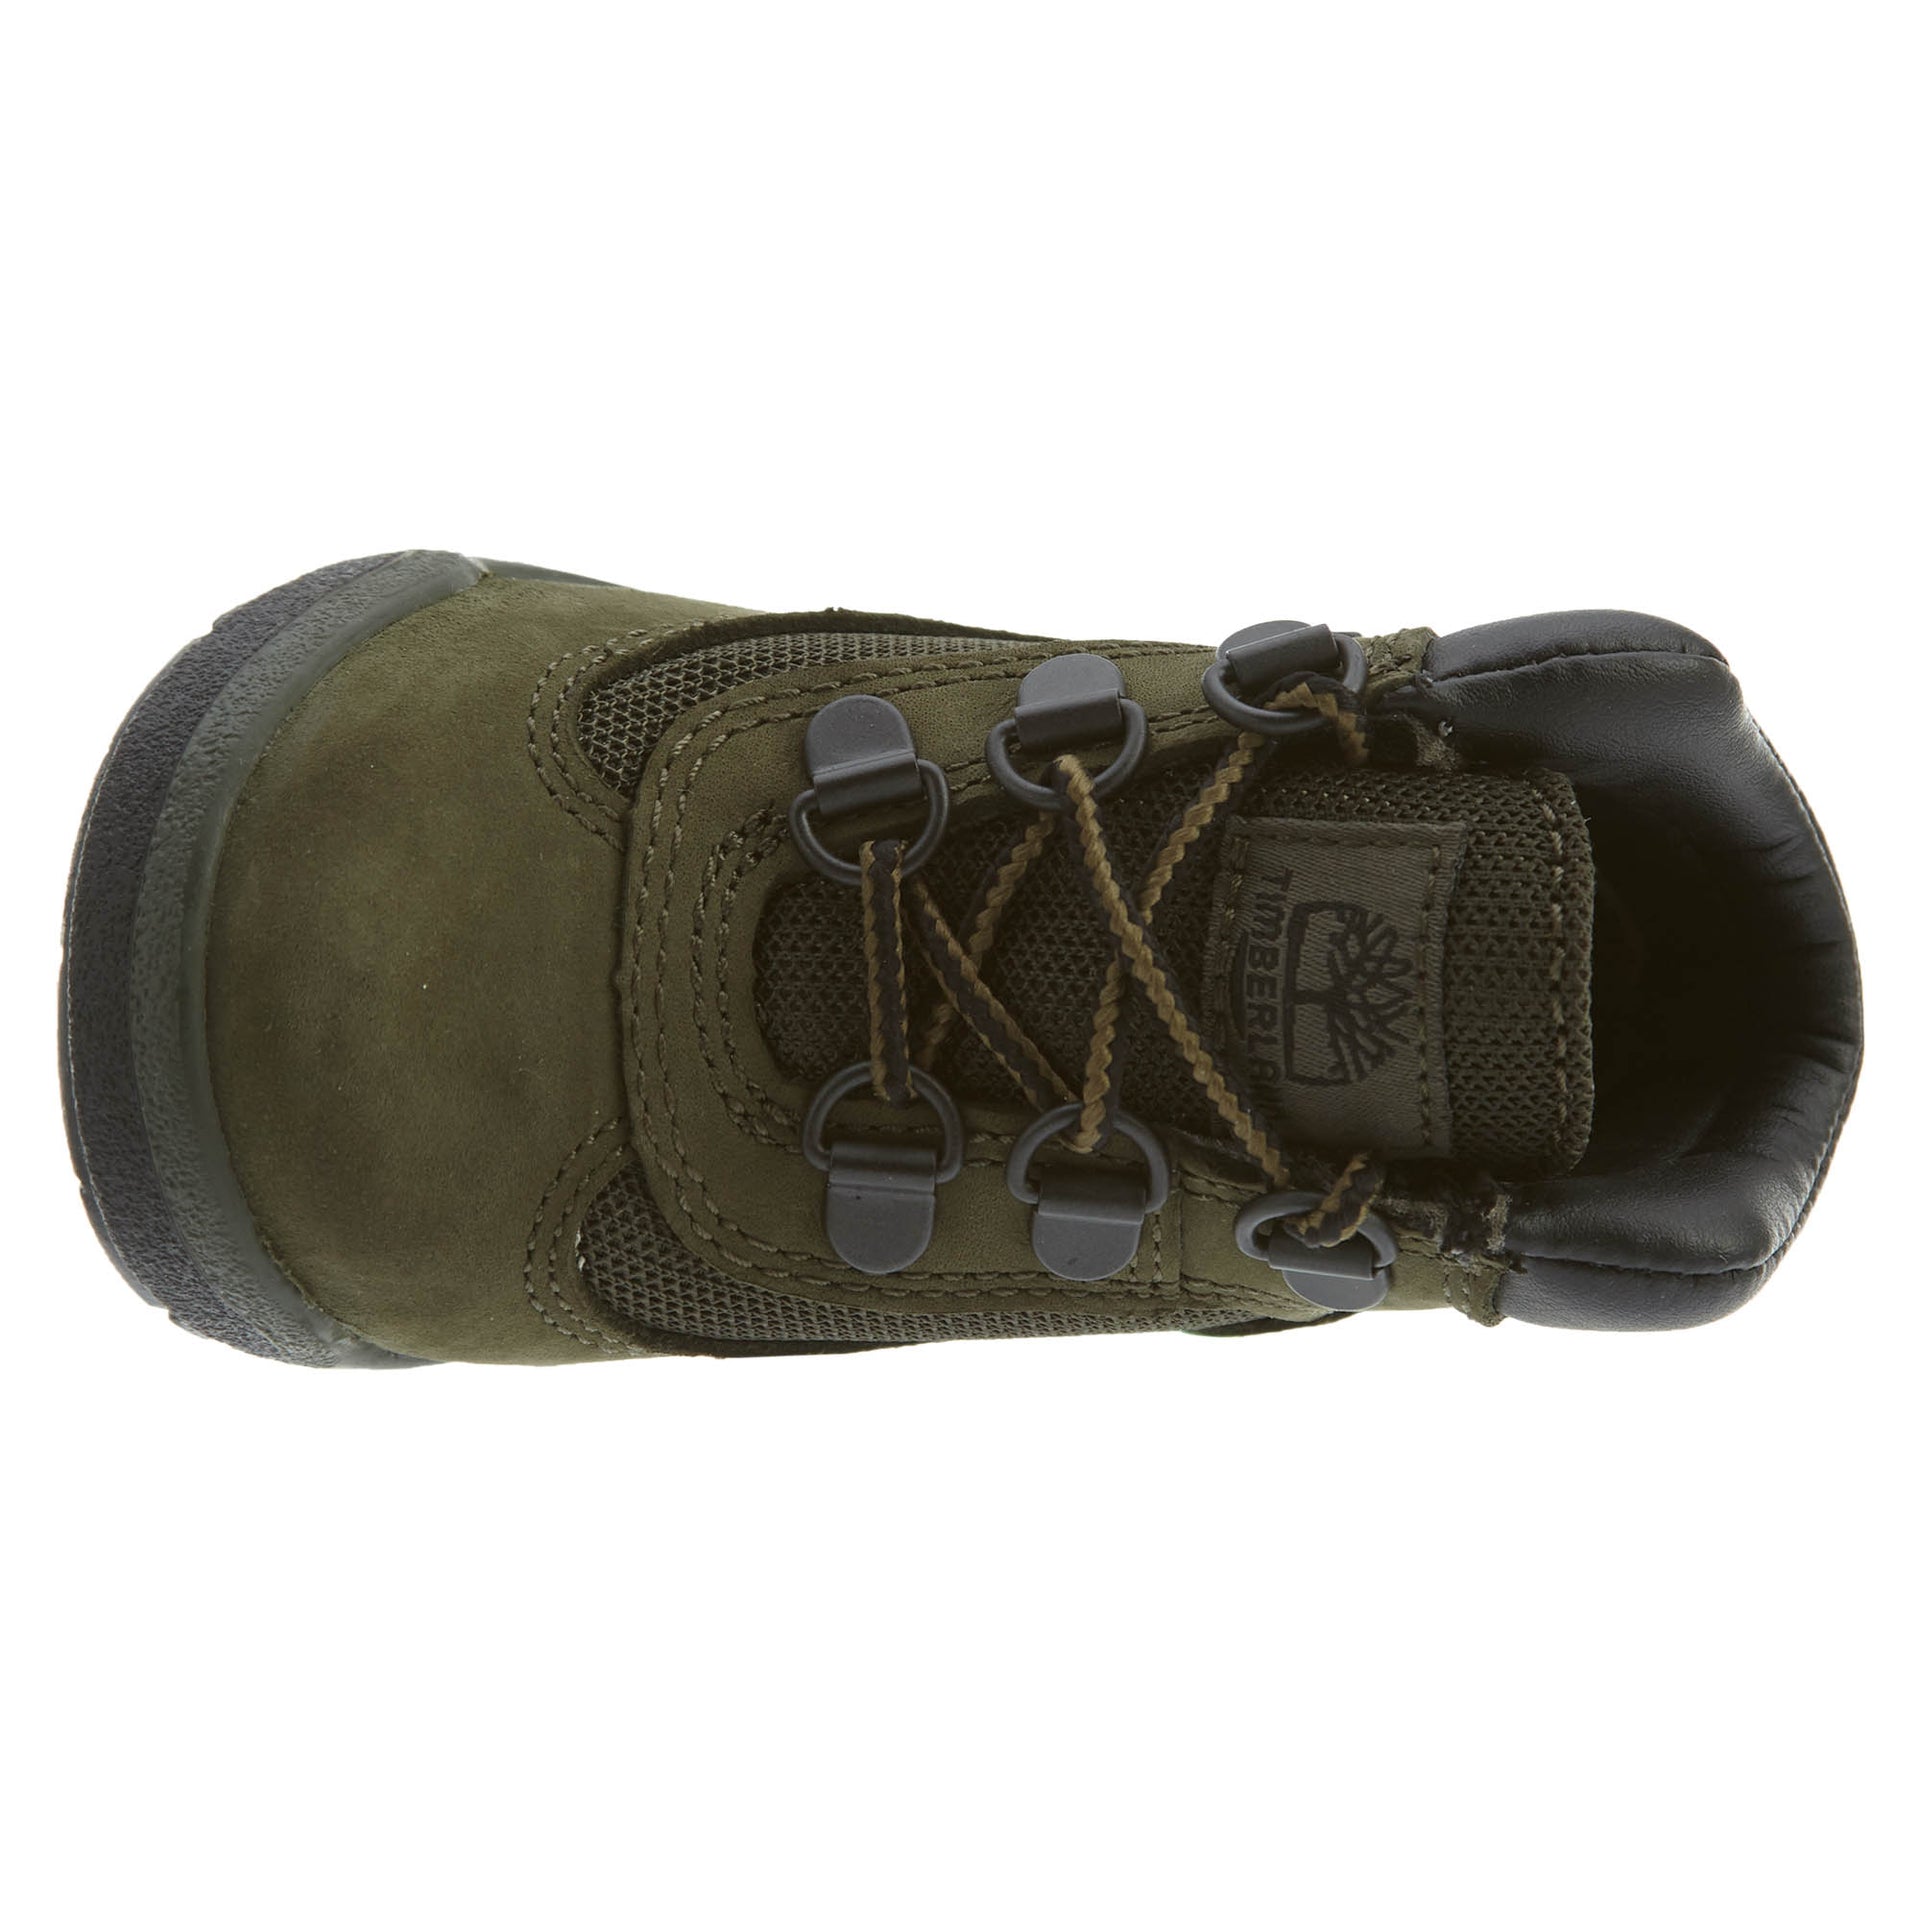 Timberland Field Boots Toddlers Style : Tb0a1yd3-768